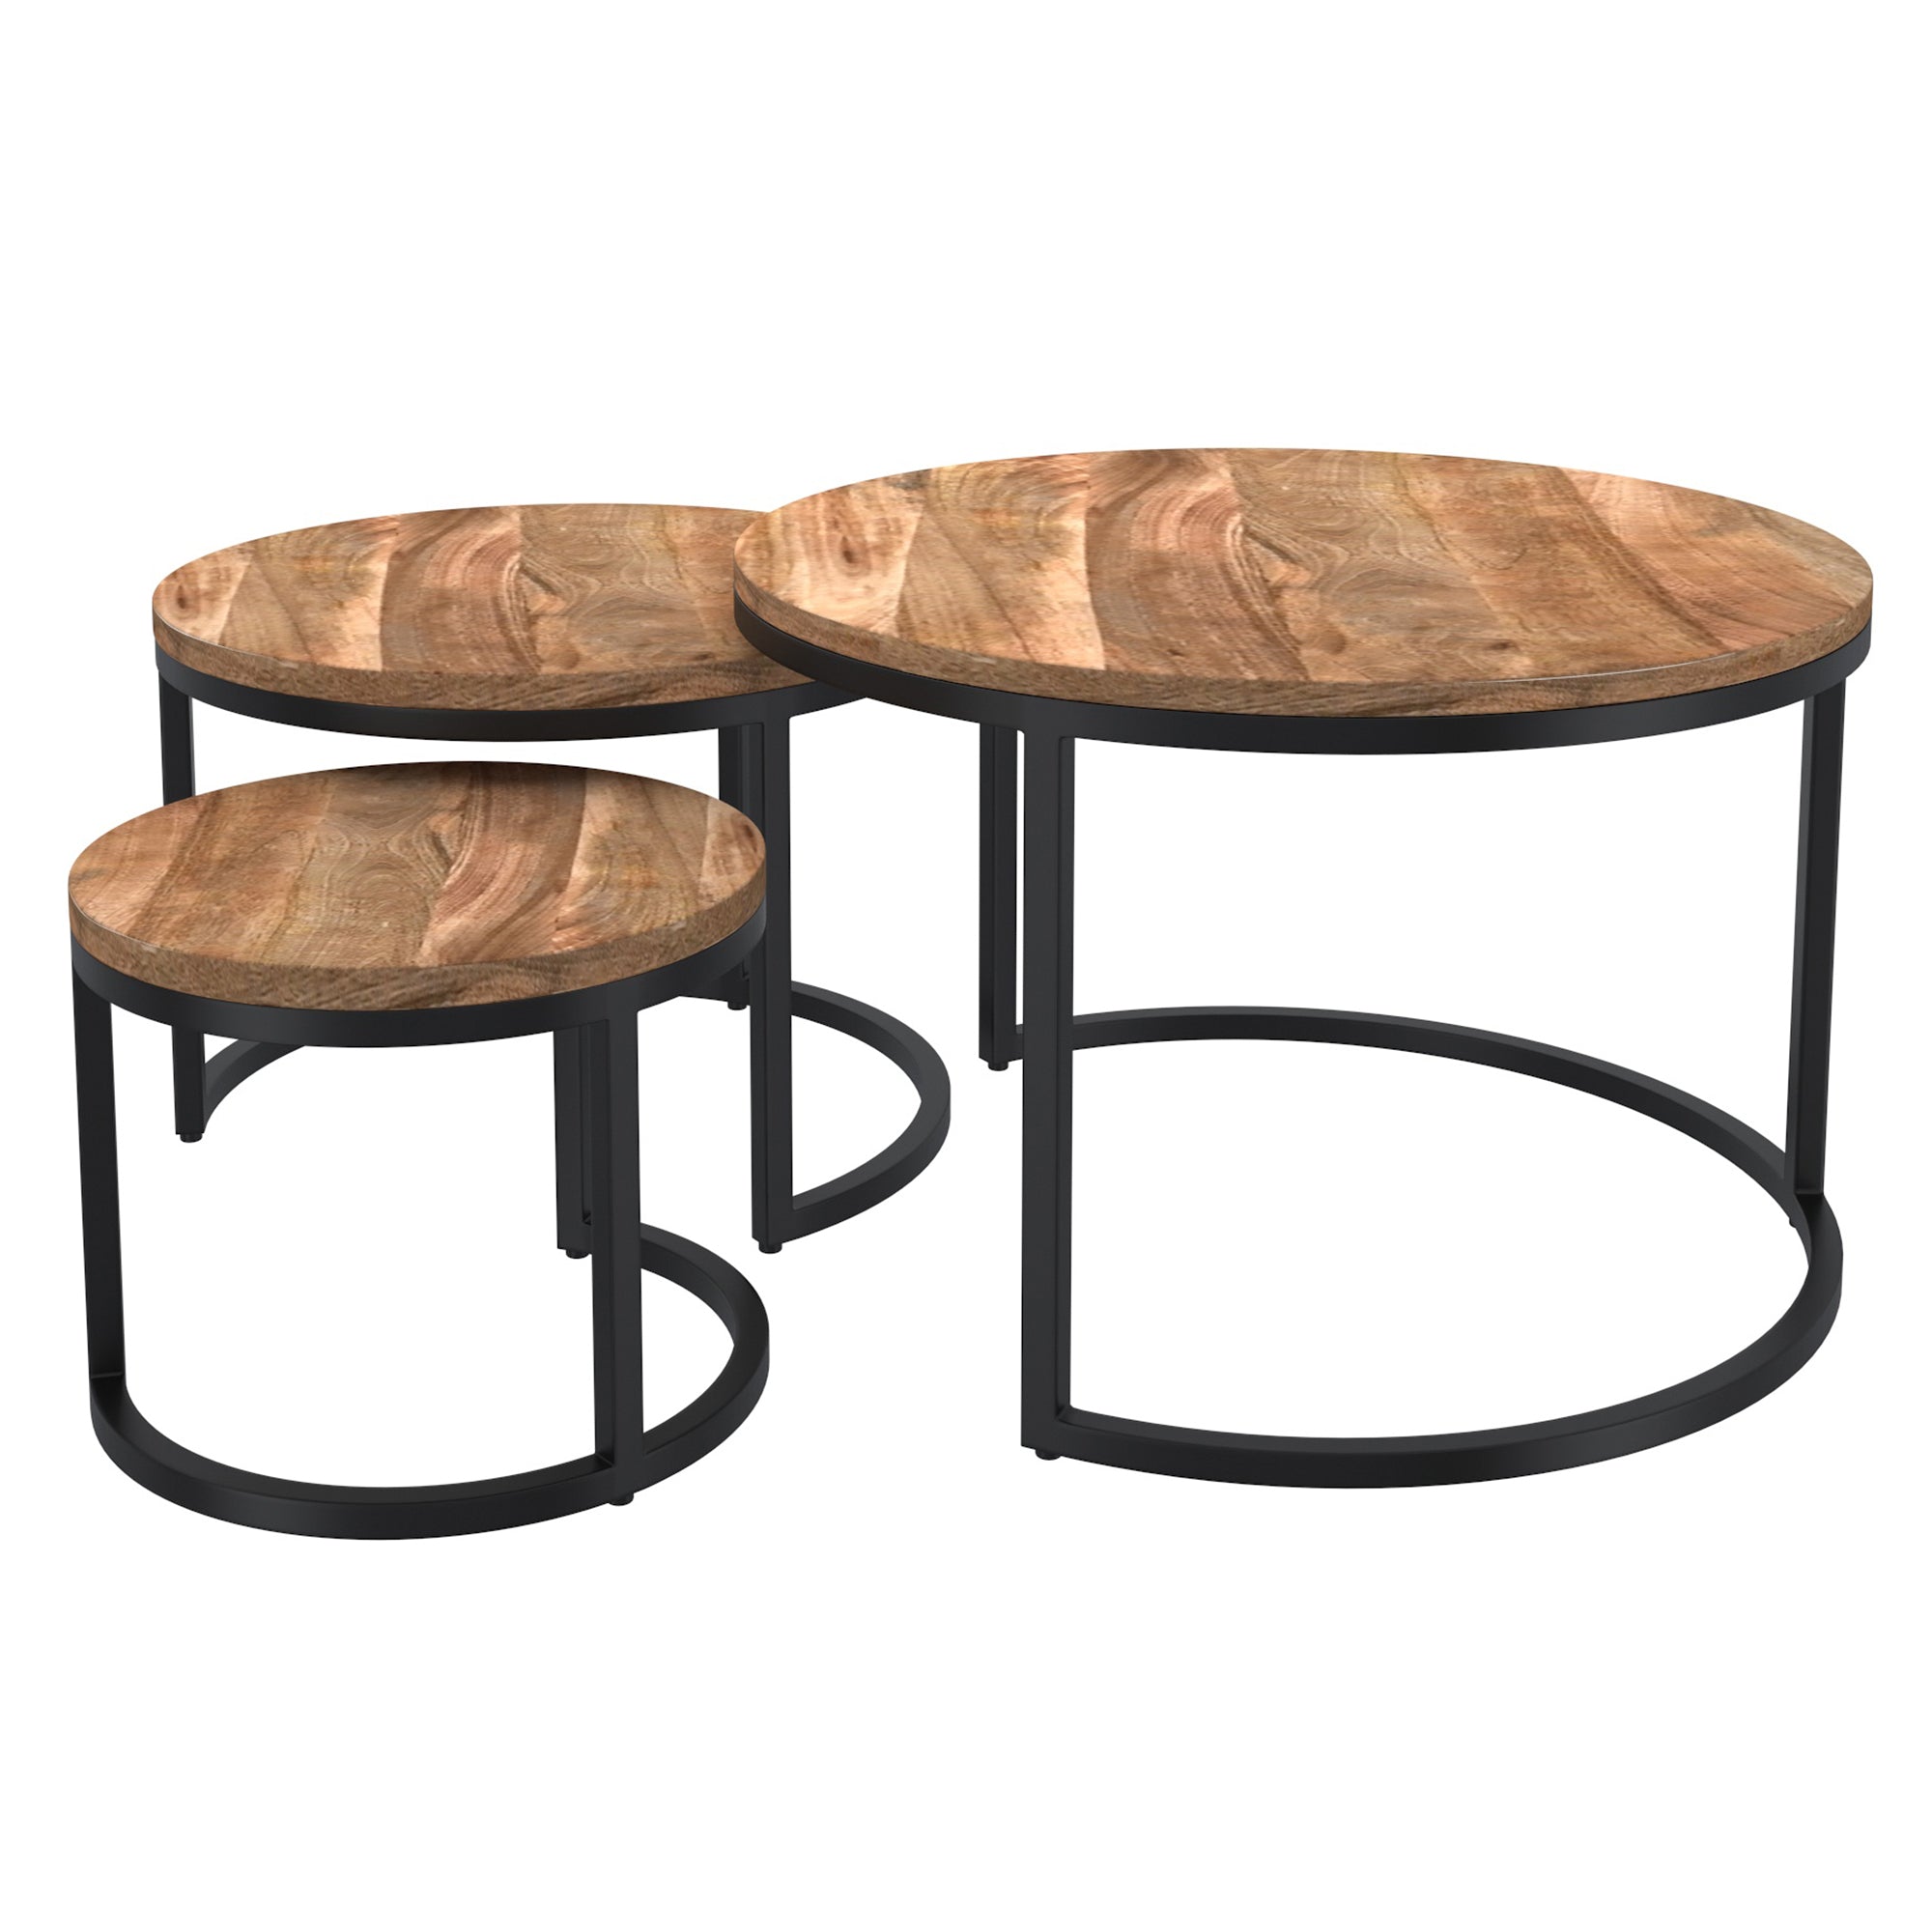 DARSH-3PC COFFEE TABLE-NATURAL